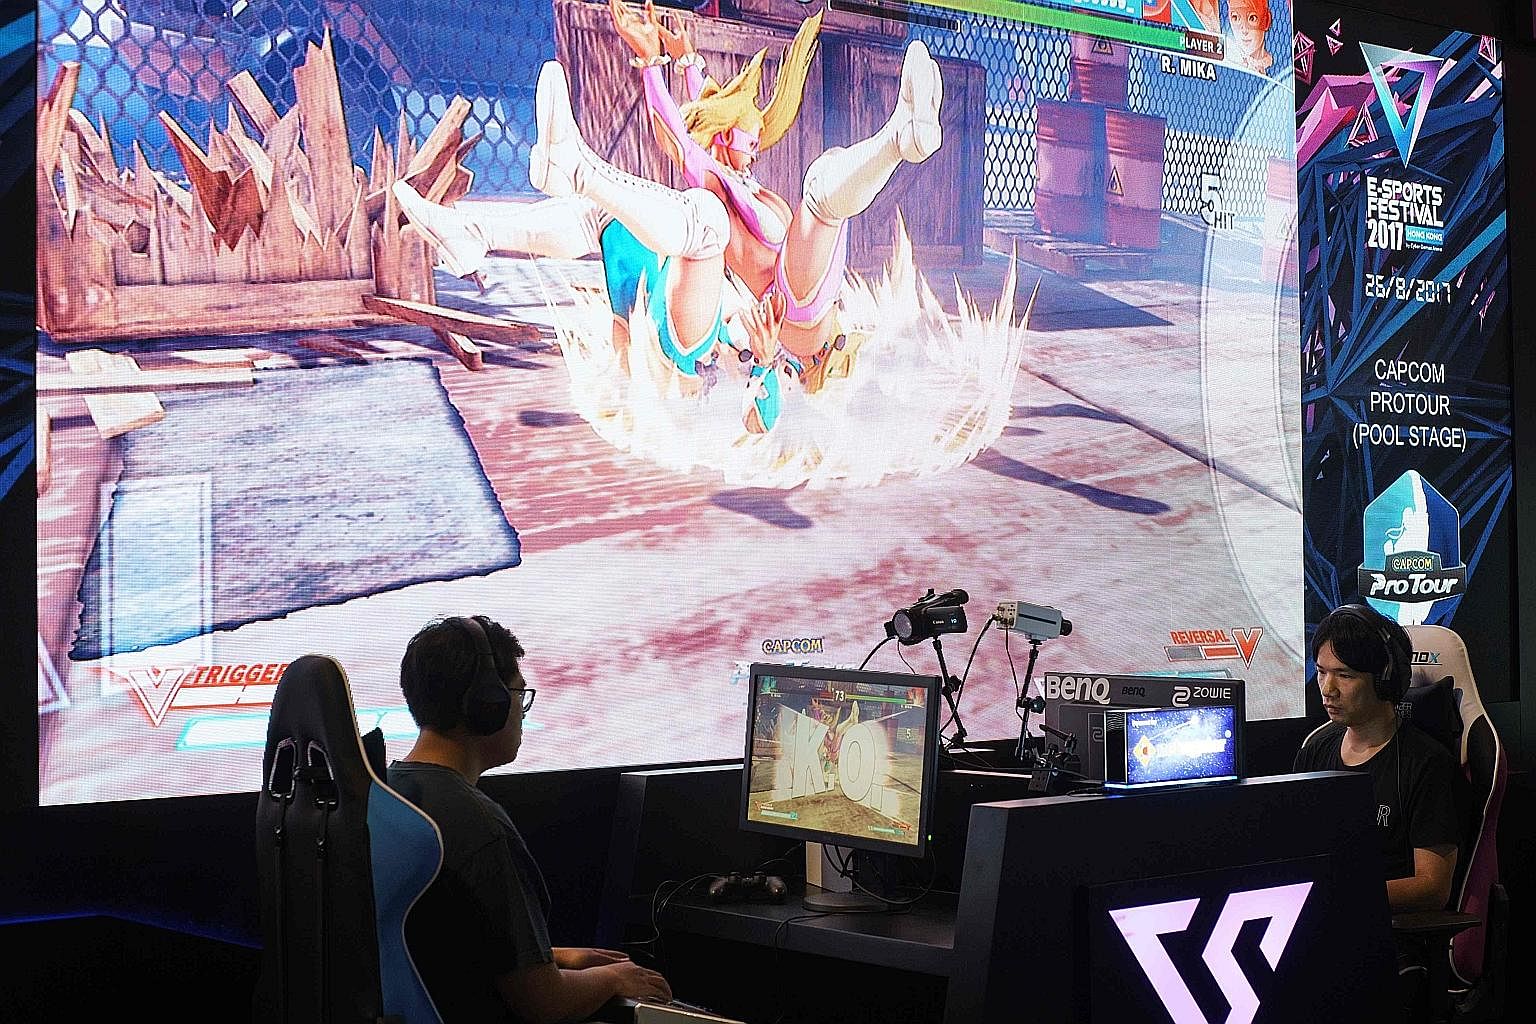 Gamers taking part in the Hong Kong eSports festival recently. All the infrastructural support in the world can't change how the public views competitive gaming if players fixate only on skill and neglect to build mass-market appeal.